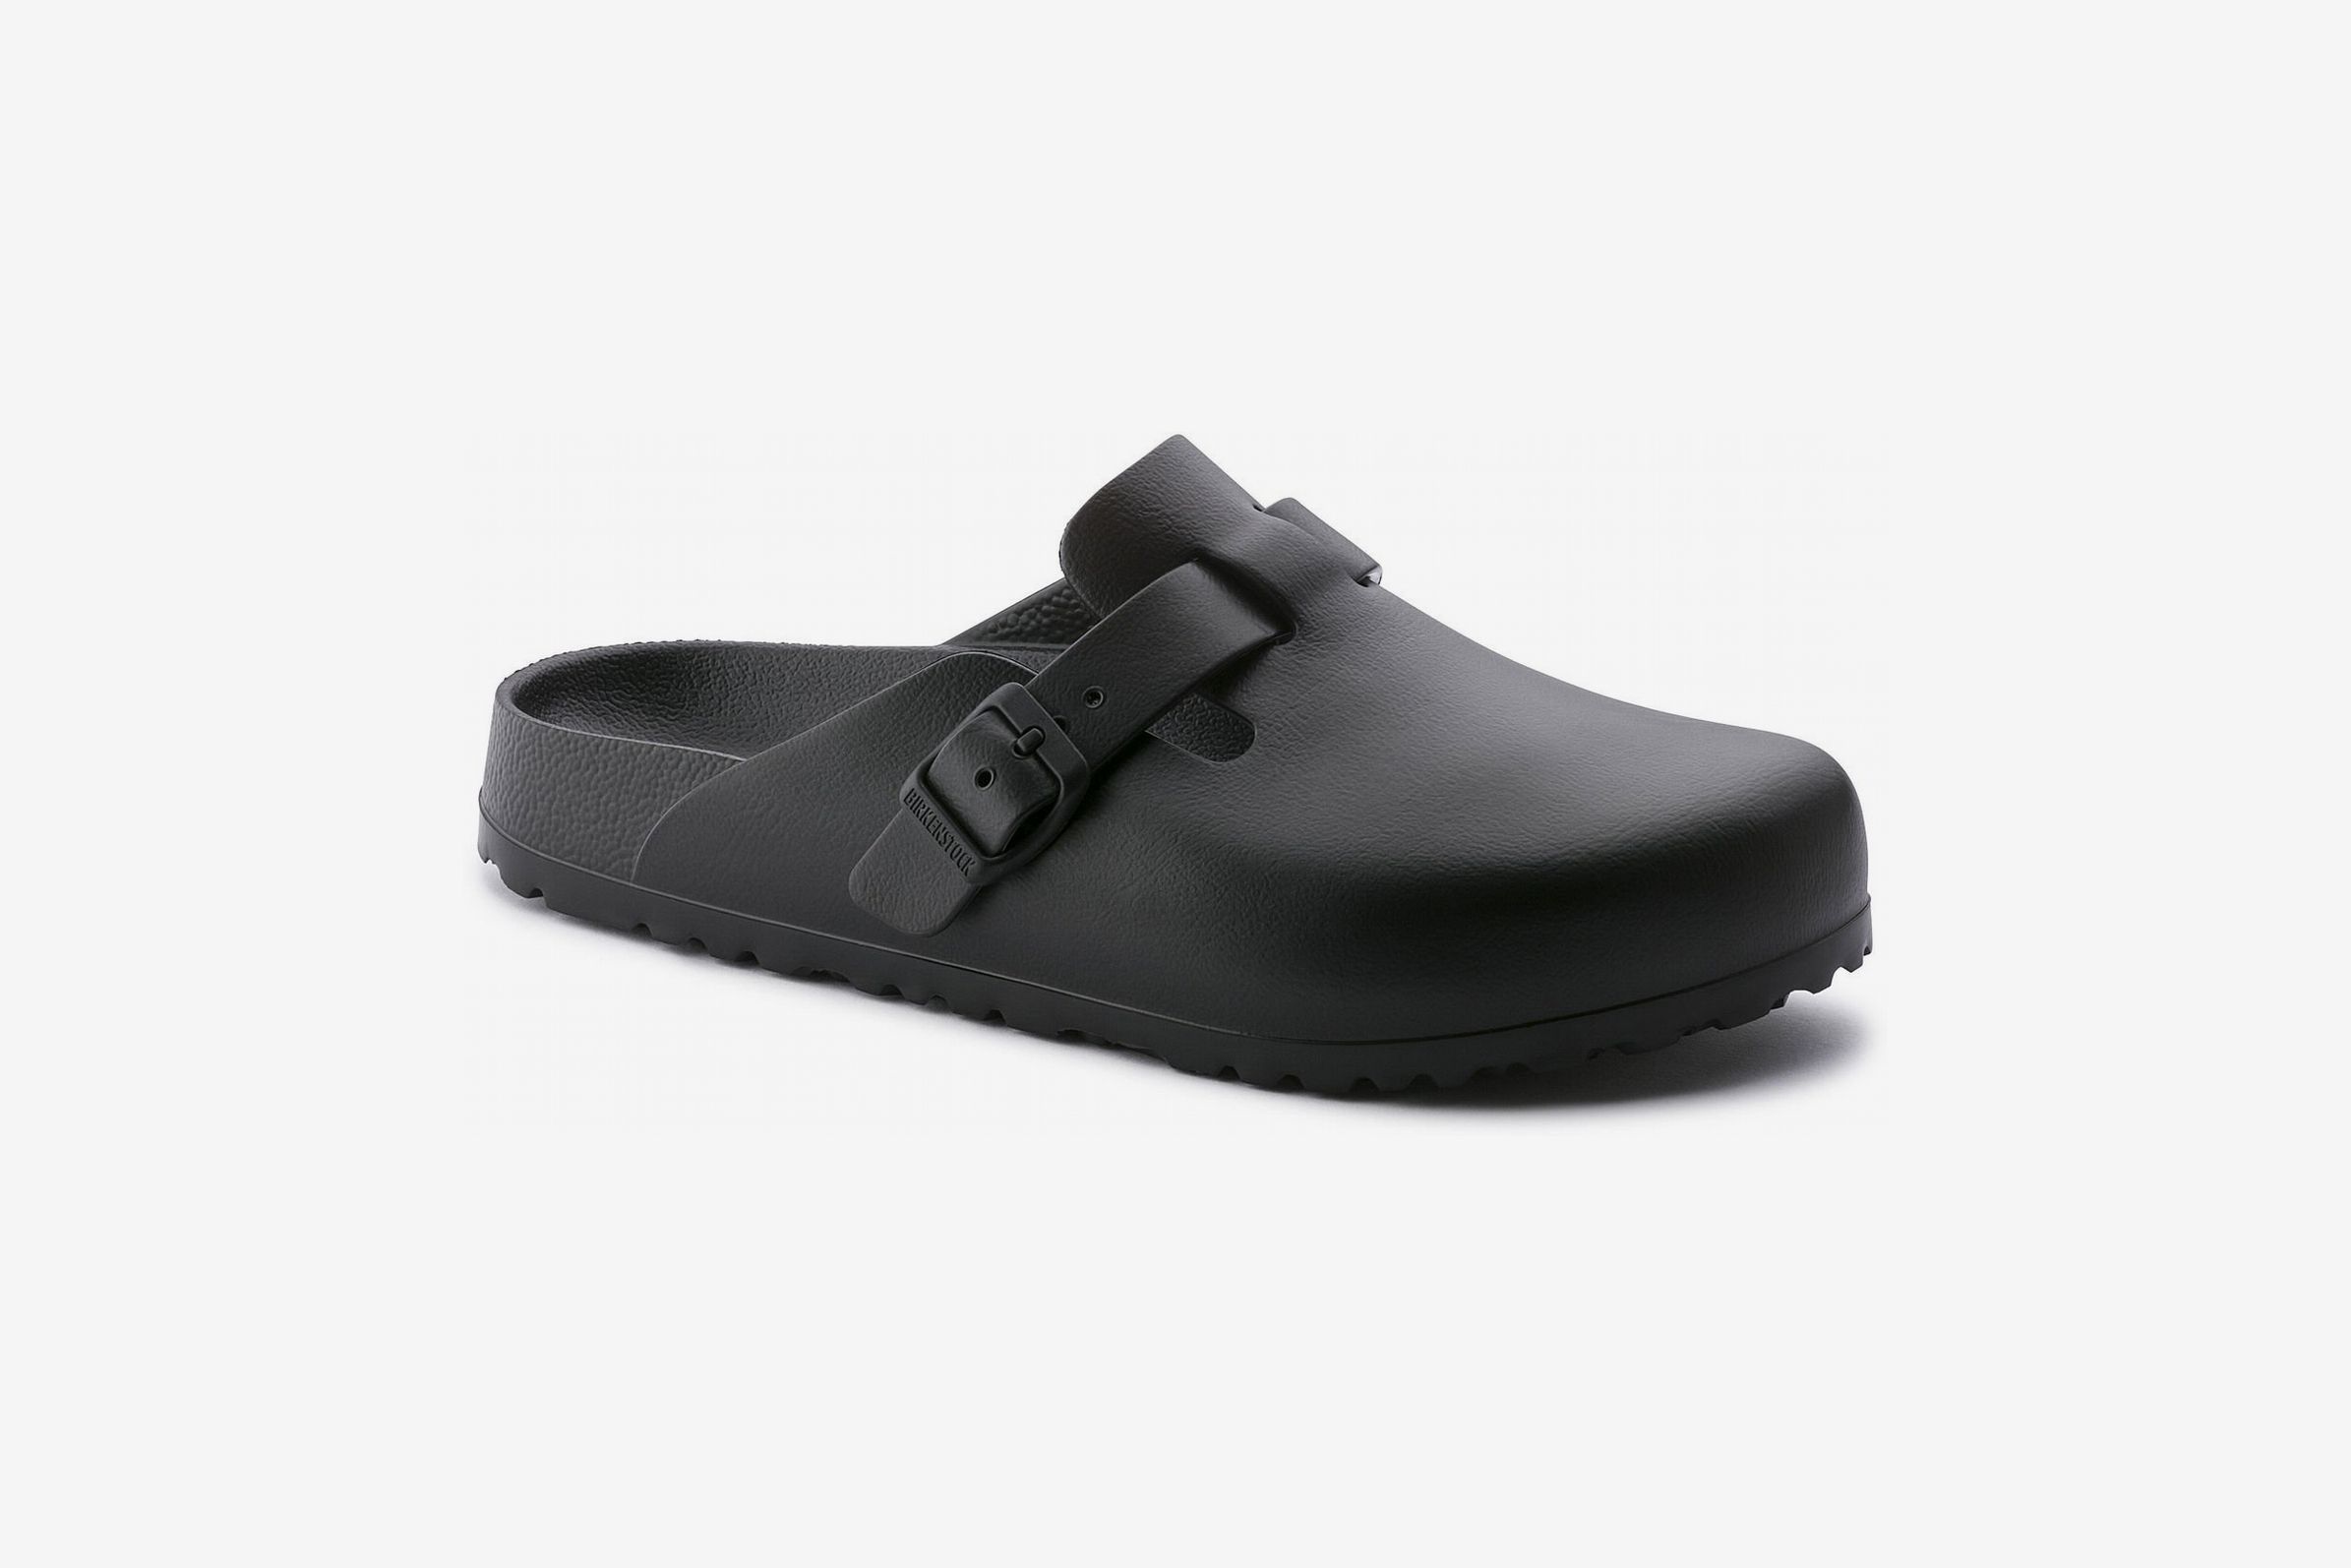 Best Clogs for Men: How to Wear and Style Clogs 2019